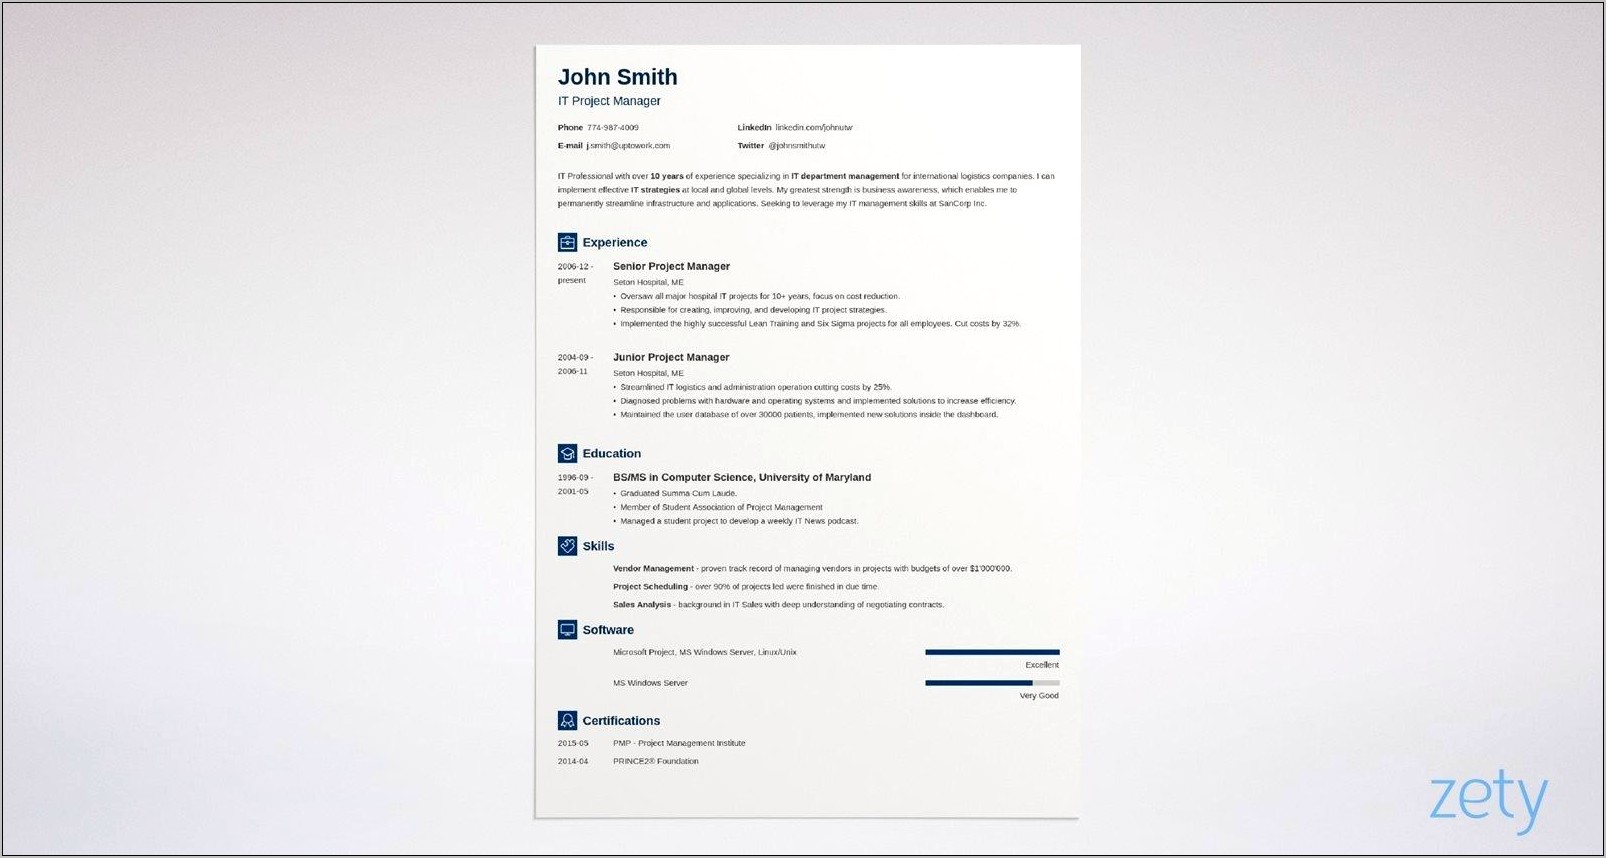 Basic Resume Template Fill In The Blank